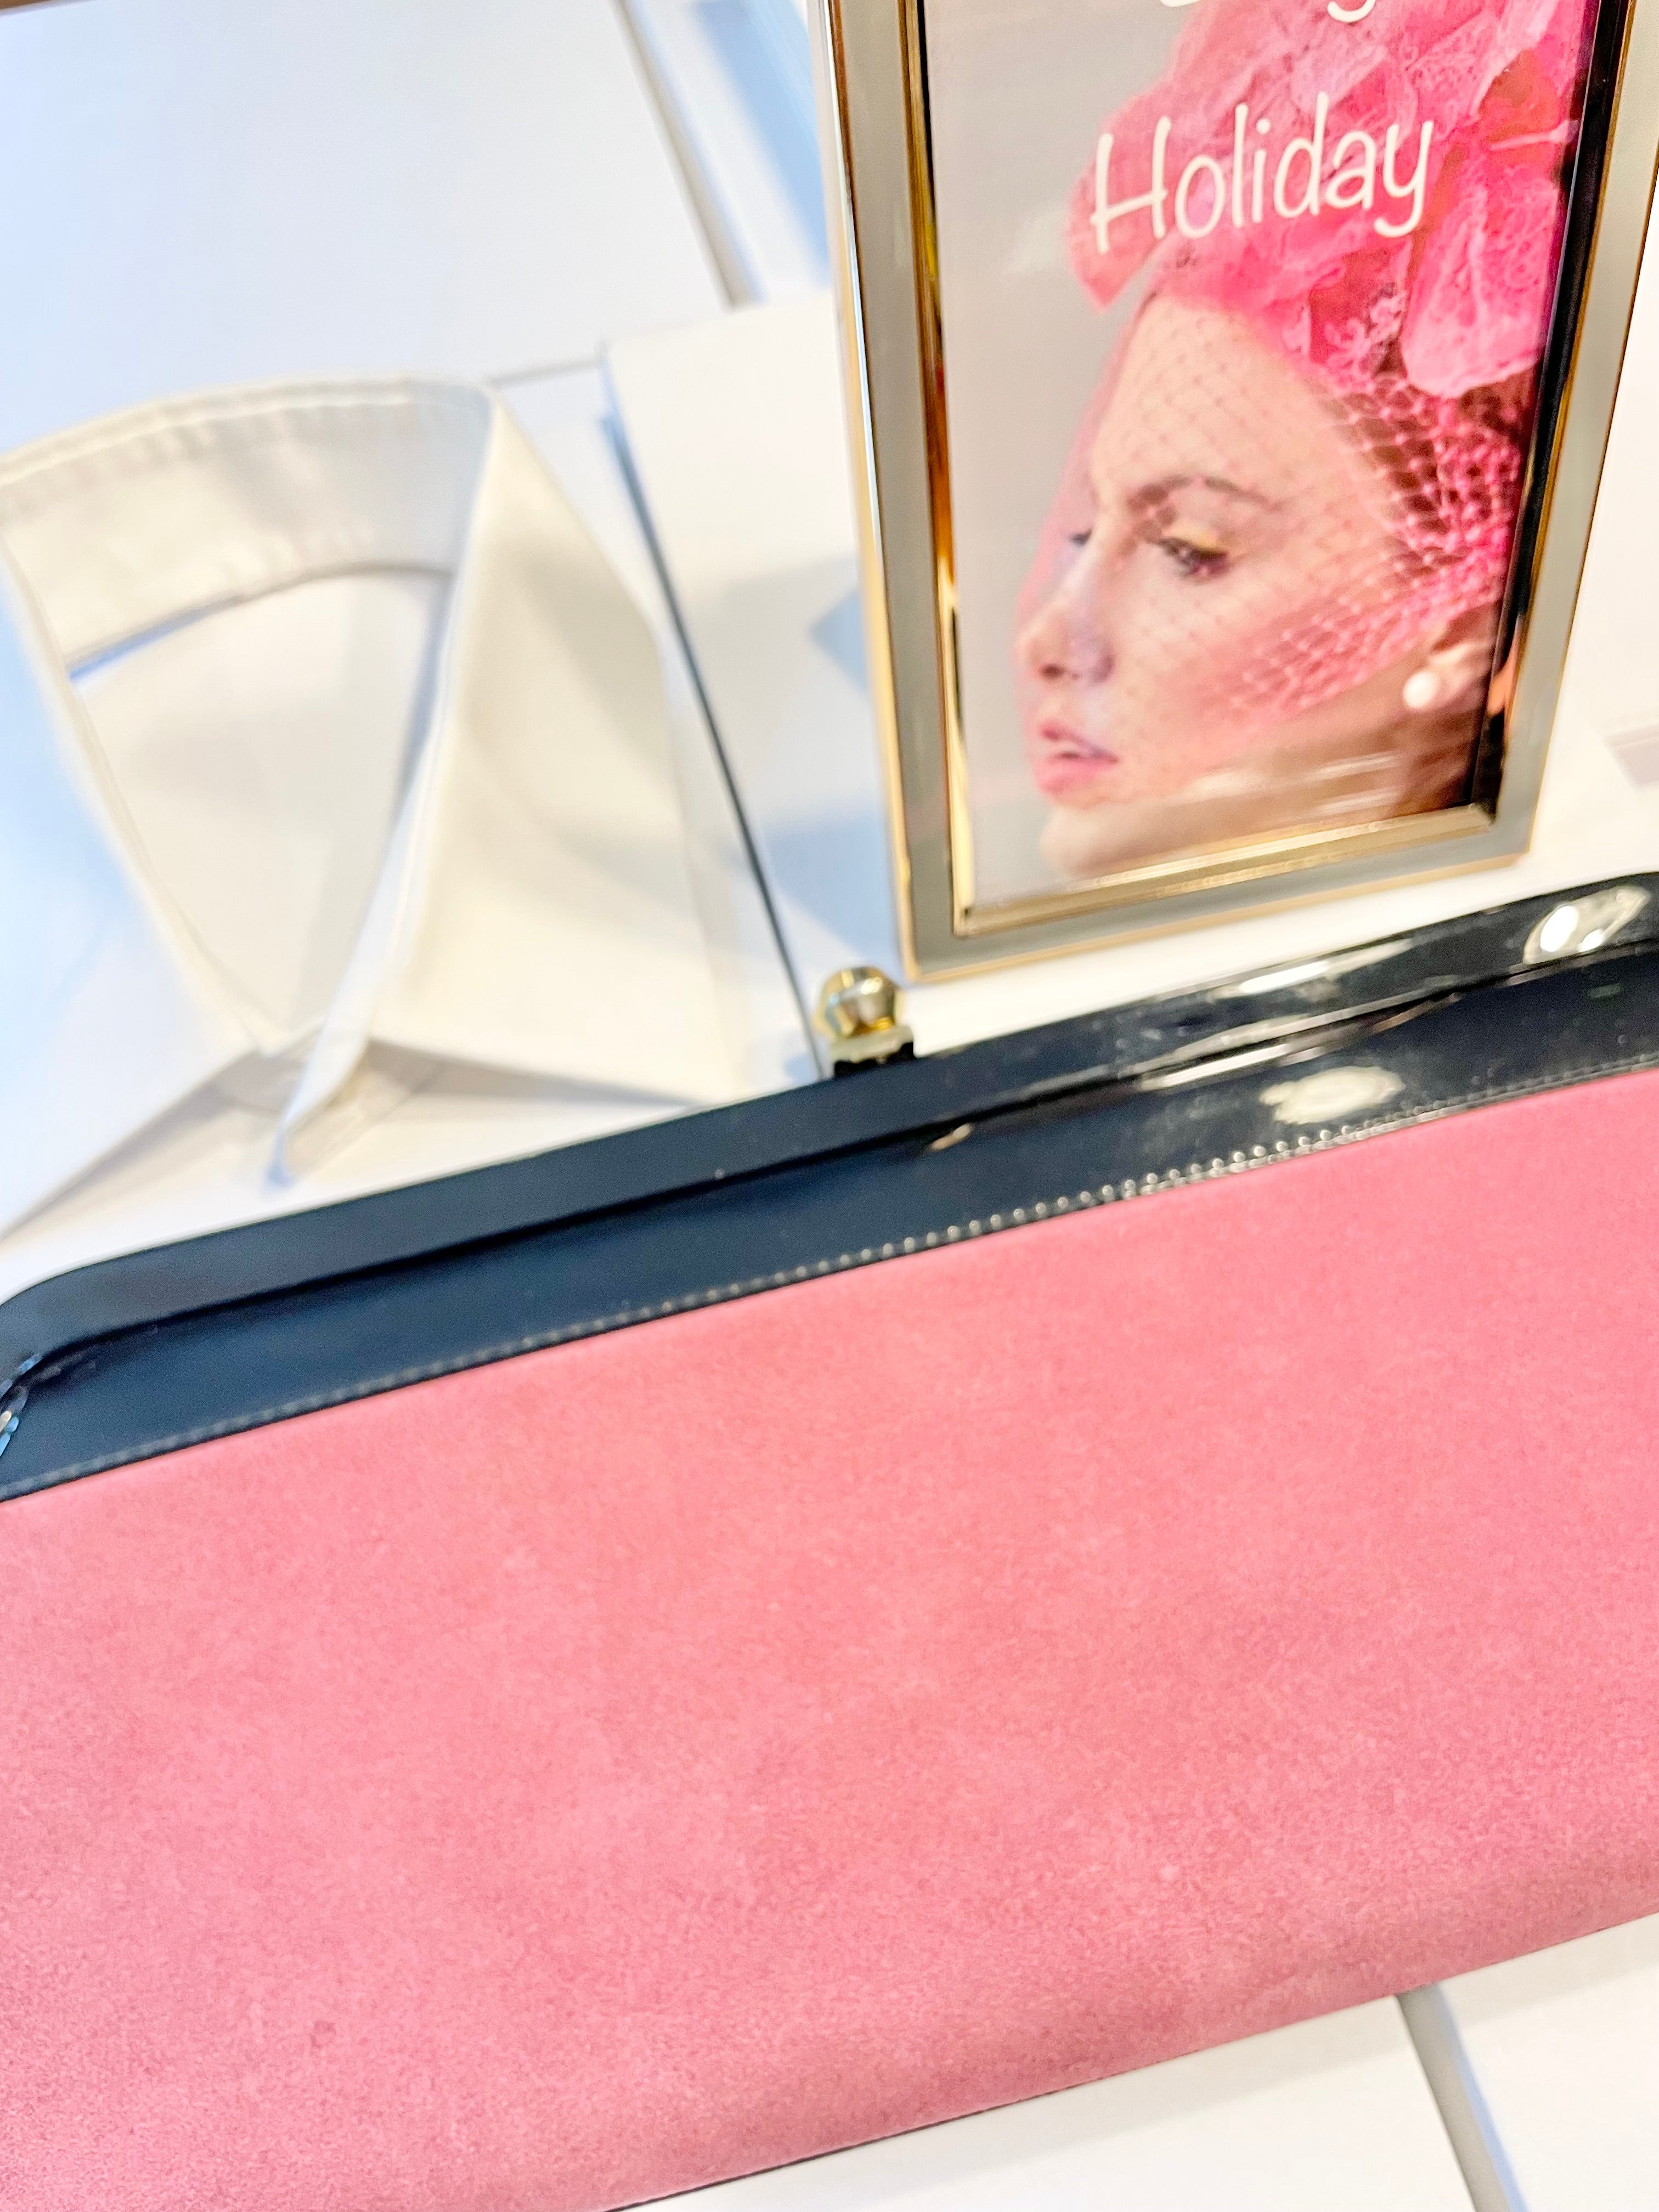 The Flirty Gal loves anything pink... the 1960's extraordinary pink, and black patent leather bag is so brilliant!